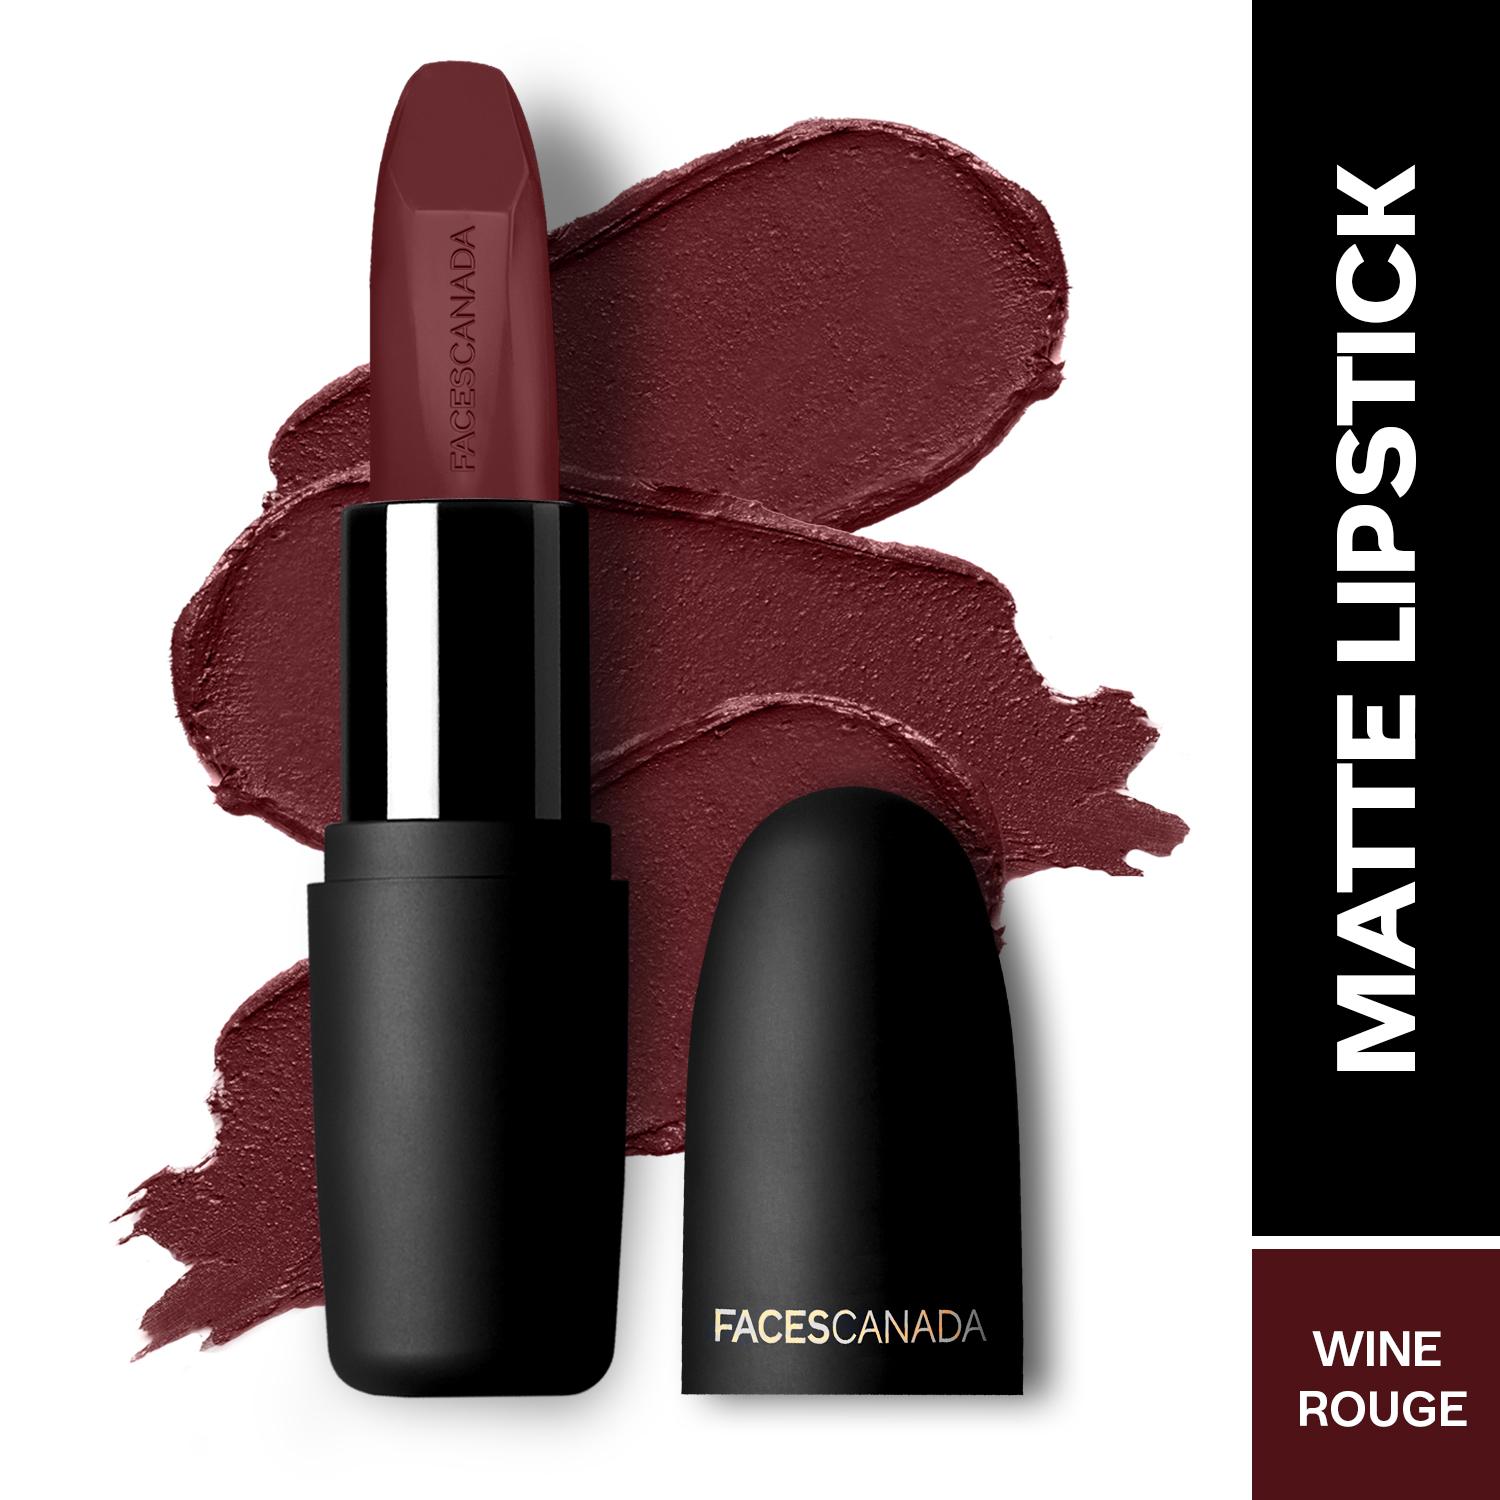 Faces Canada | Faces Canada Weightless Matte Lipstick, Pigmented and Hydrated Lips - Wine Rouge 30 (4.5 g)